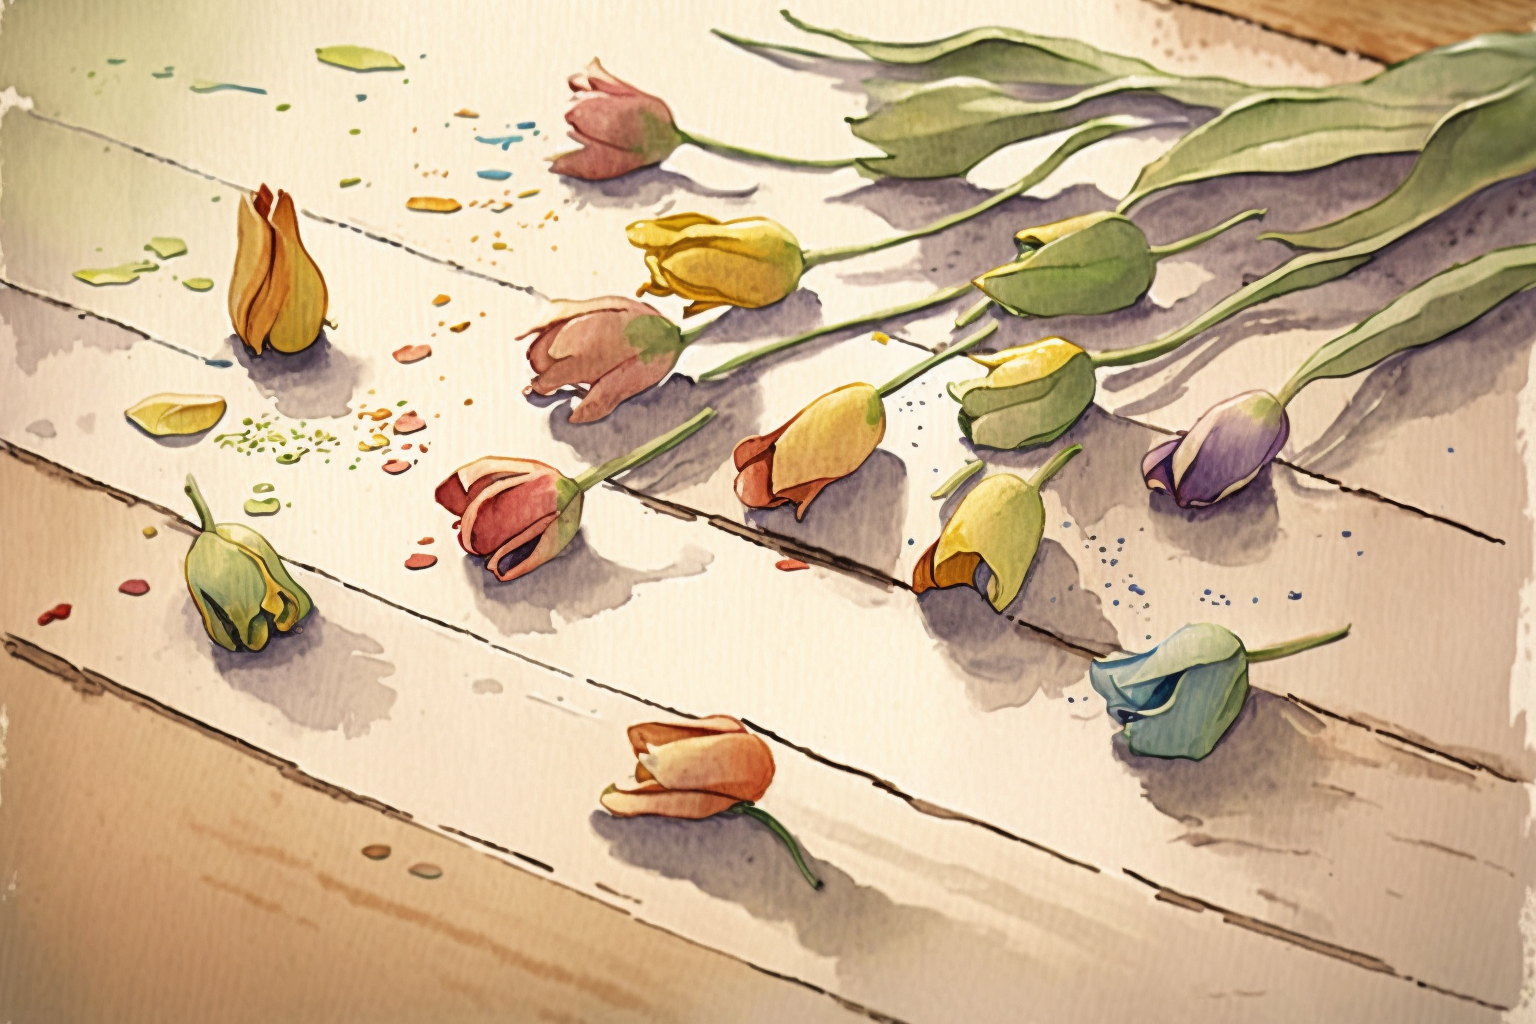 Illustration of tulips scattered on a wooden floor